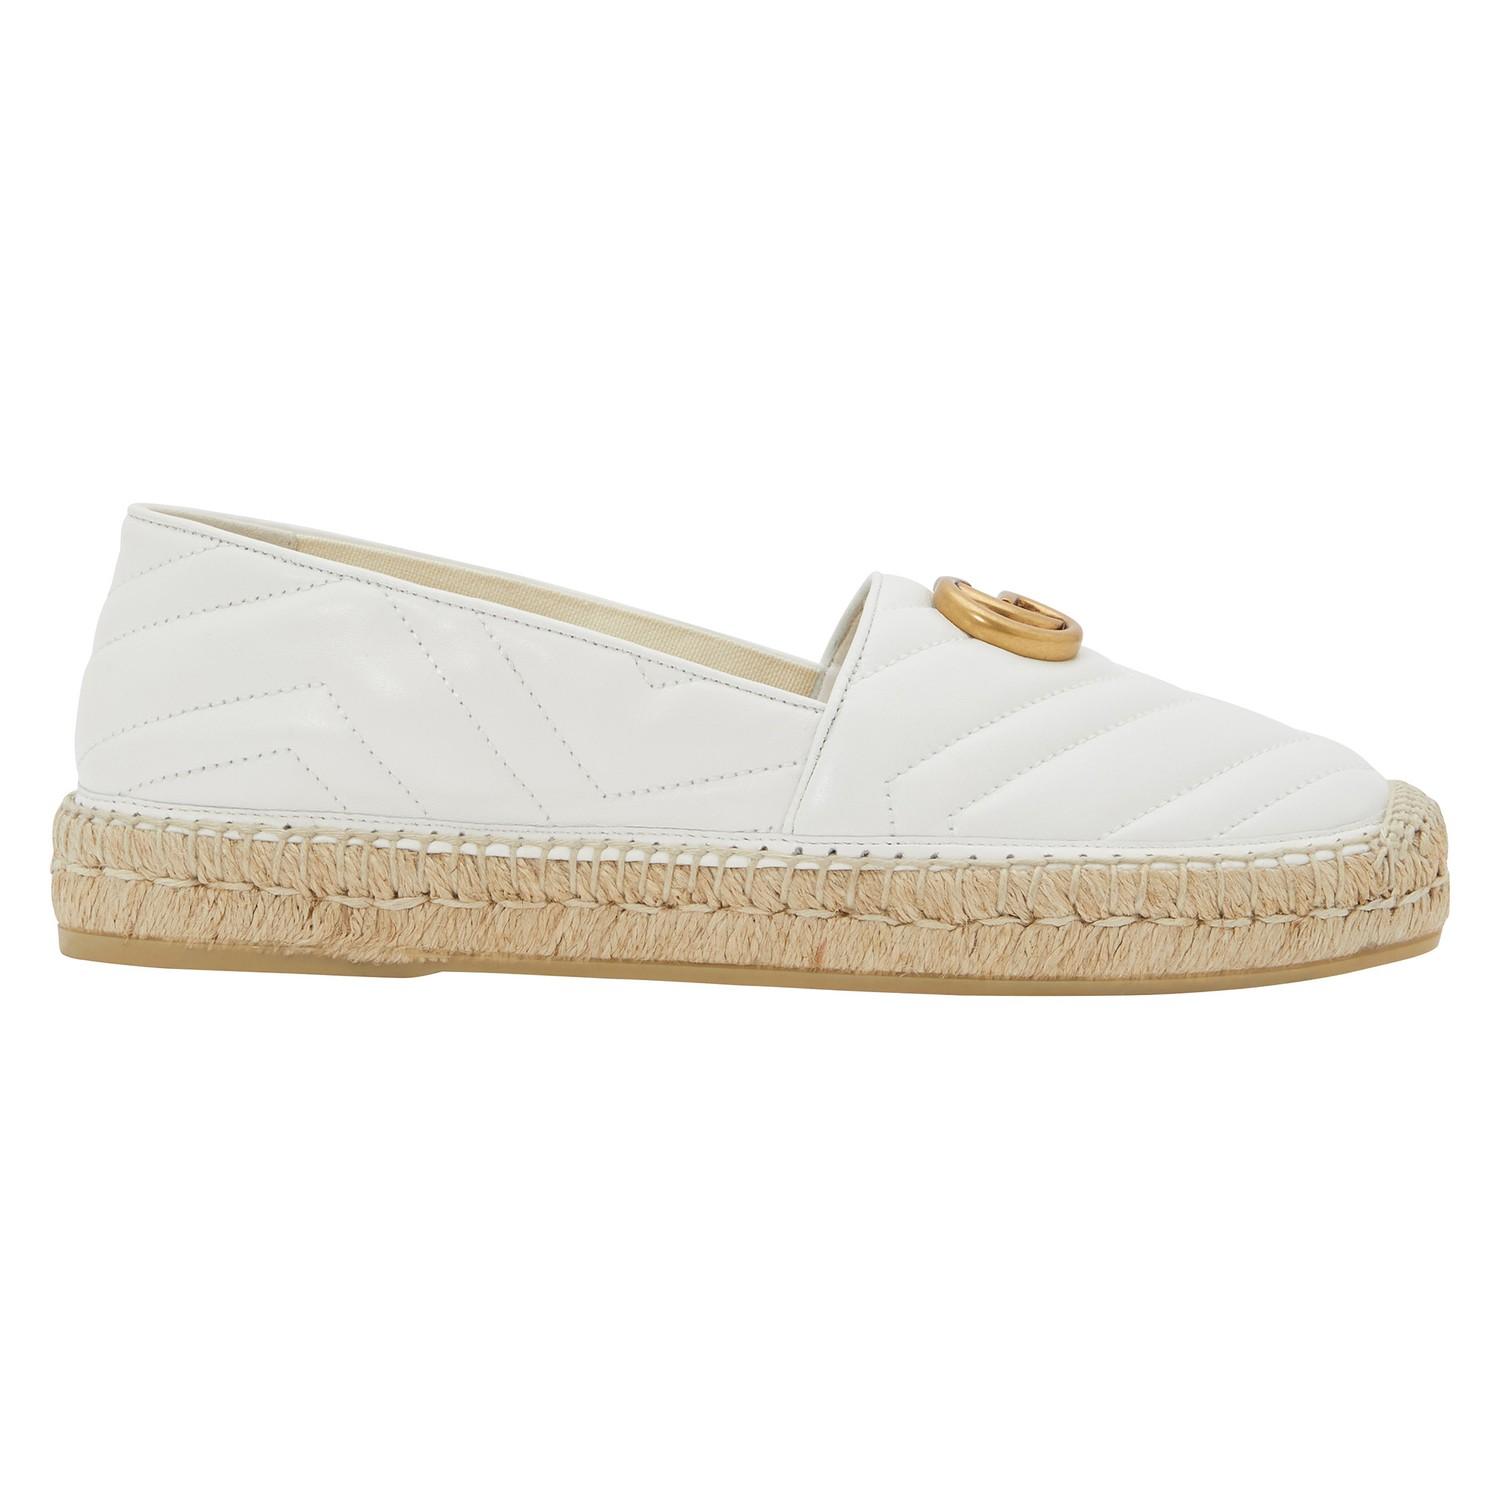 Gucci Leather Nappa Charlotte Espadrilles in White - Lyst